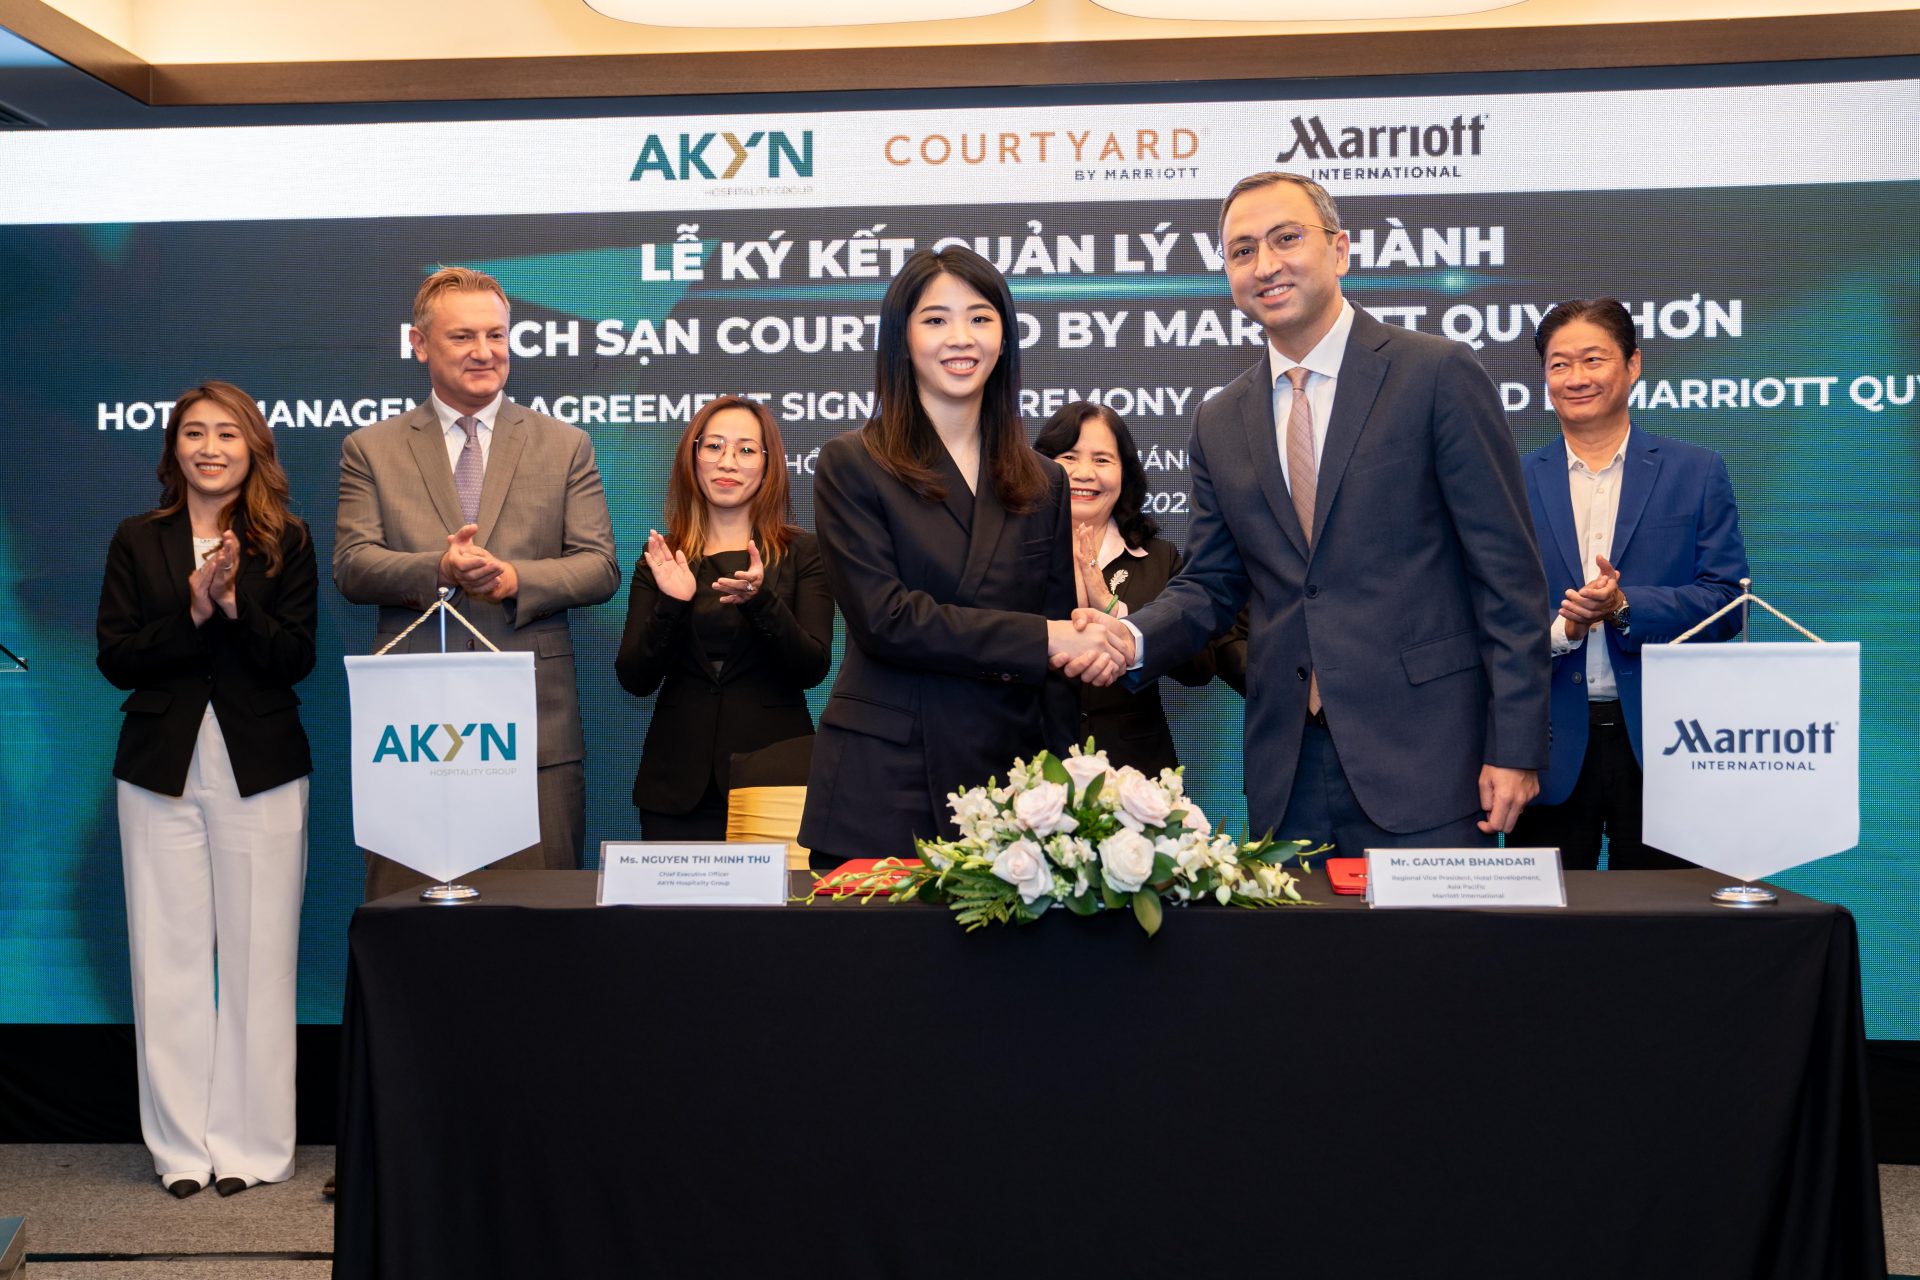 AKYN HOSPITALITY GROUP & MARRIOTT INTERNATIONAL SIGN AGREEMENT TO MANAGE AND OPERATE COURTYARD BY MARRIOTT QUY NHON